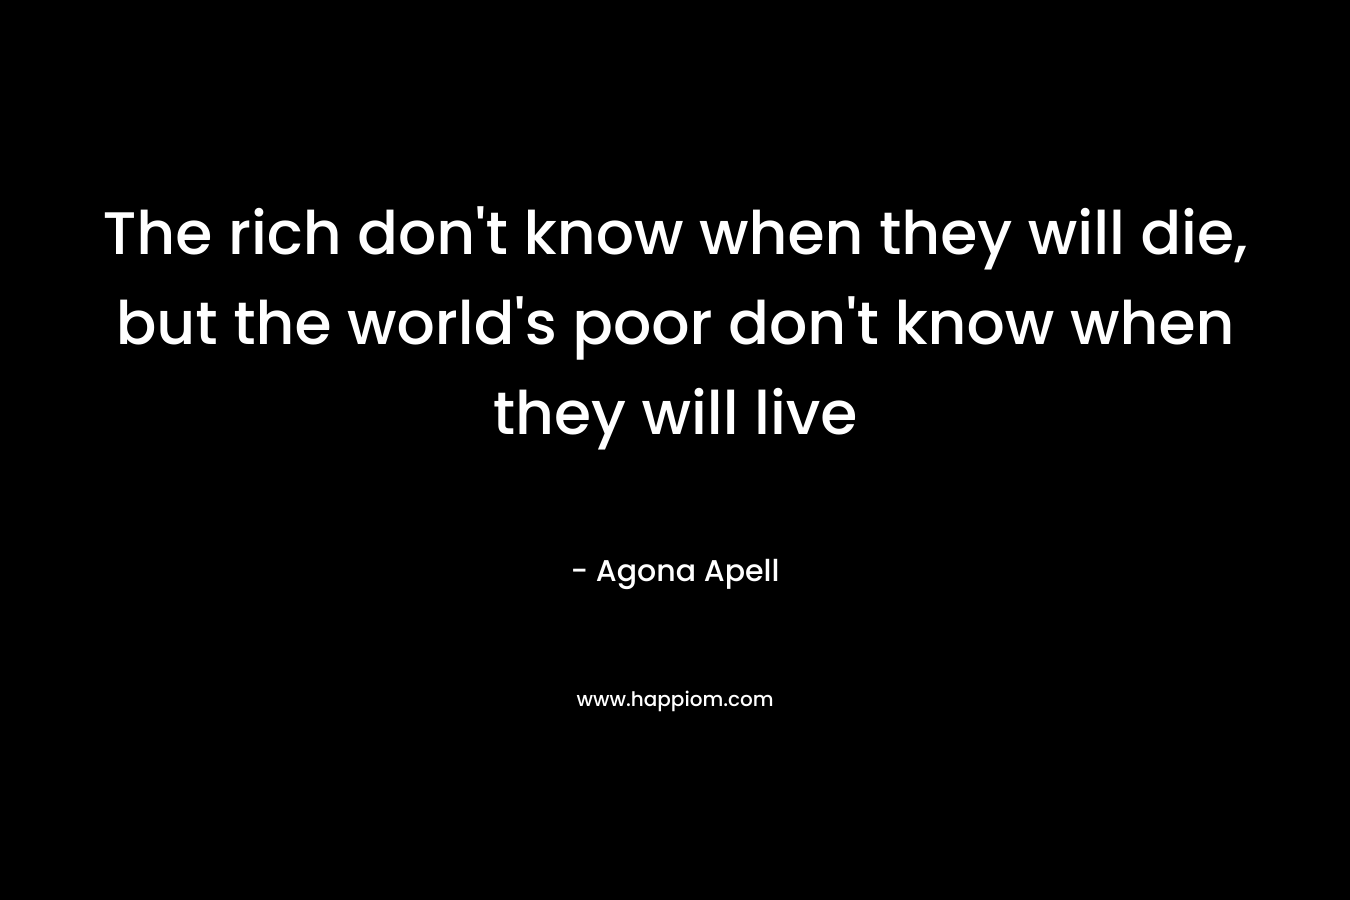 The rich don’t know when they will die, but the world’s poor don’t know when they will live – Agona Apell